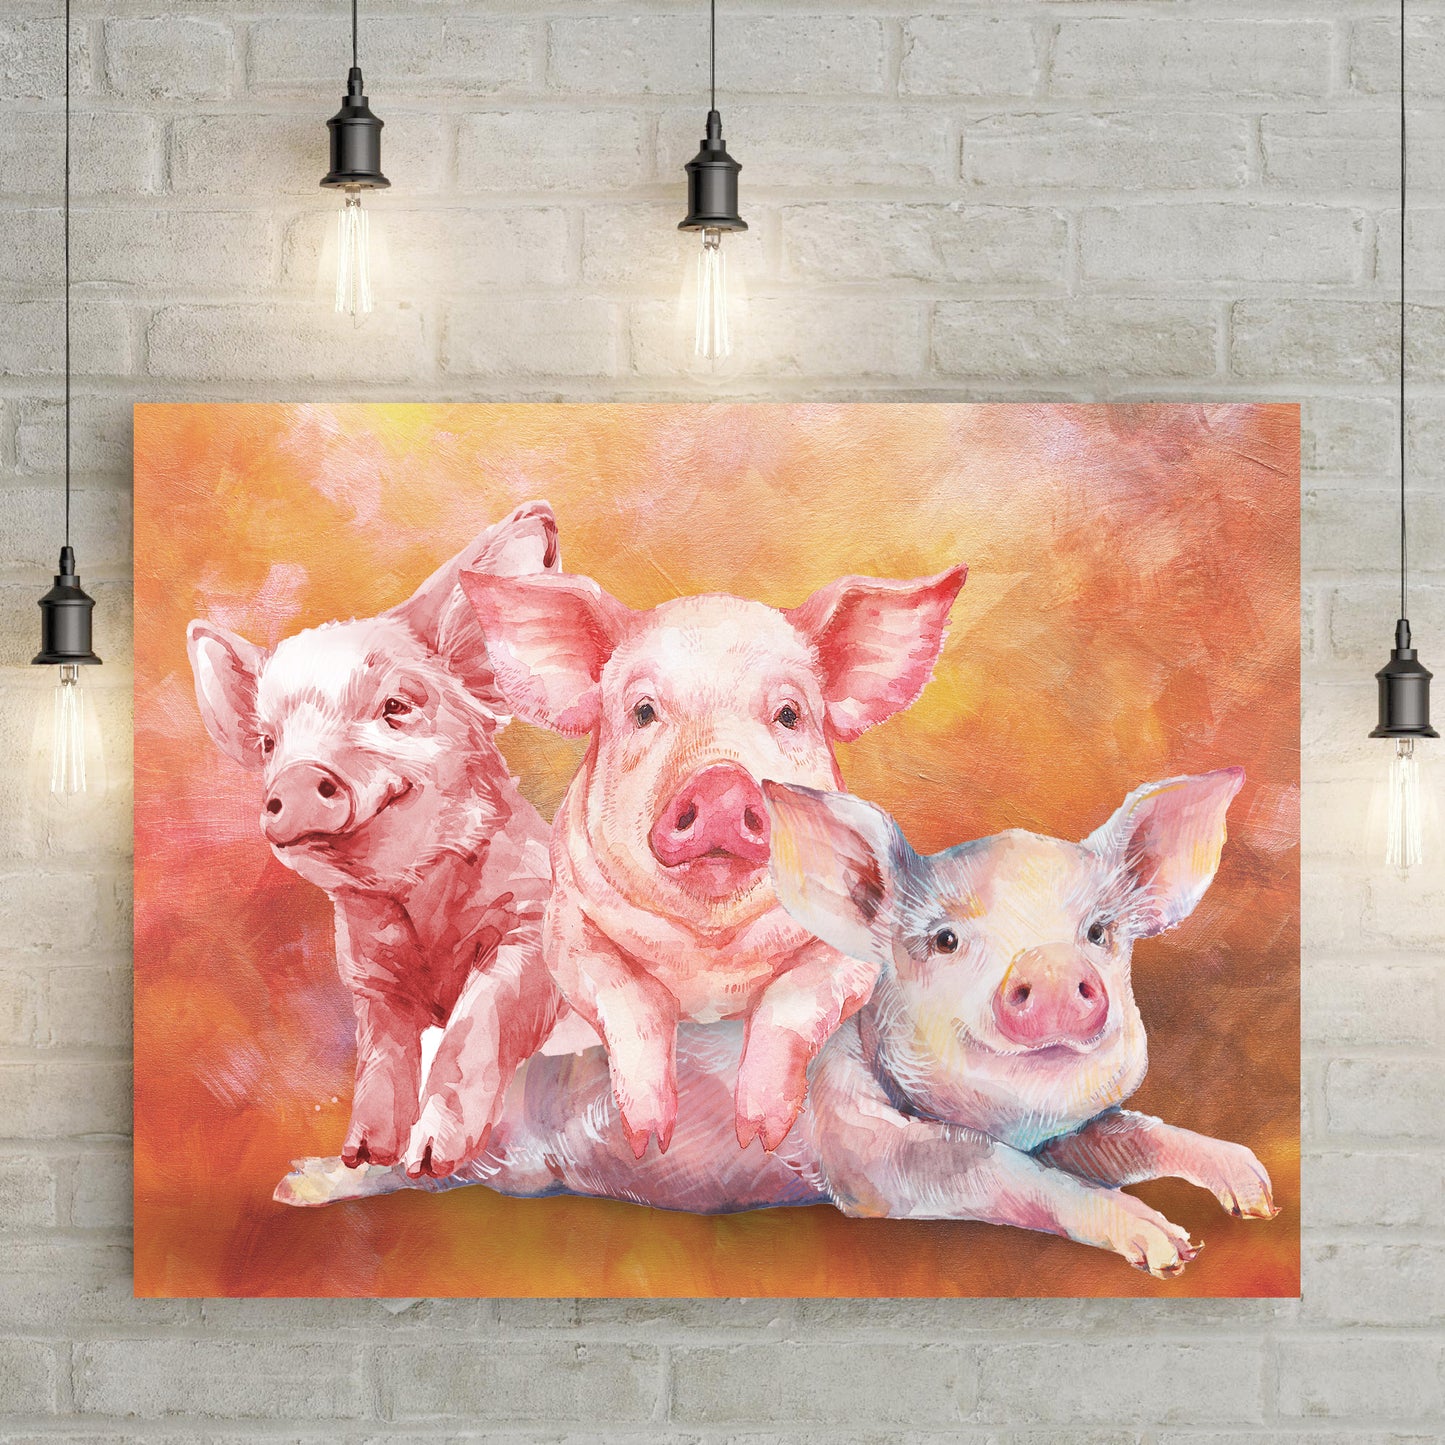 Three Baby Pigs Watercolor Canvas Wall Art - Image by Tailored Canvases